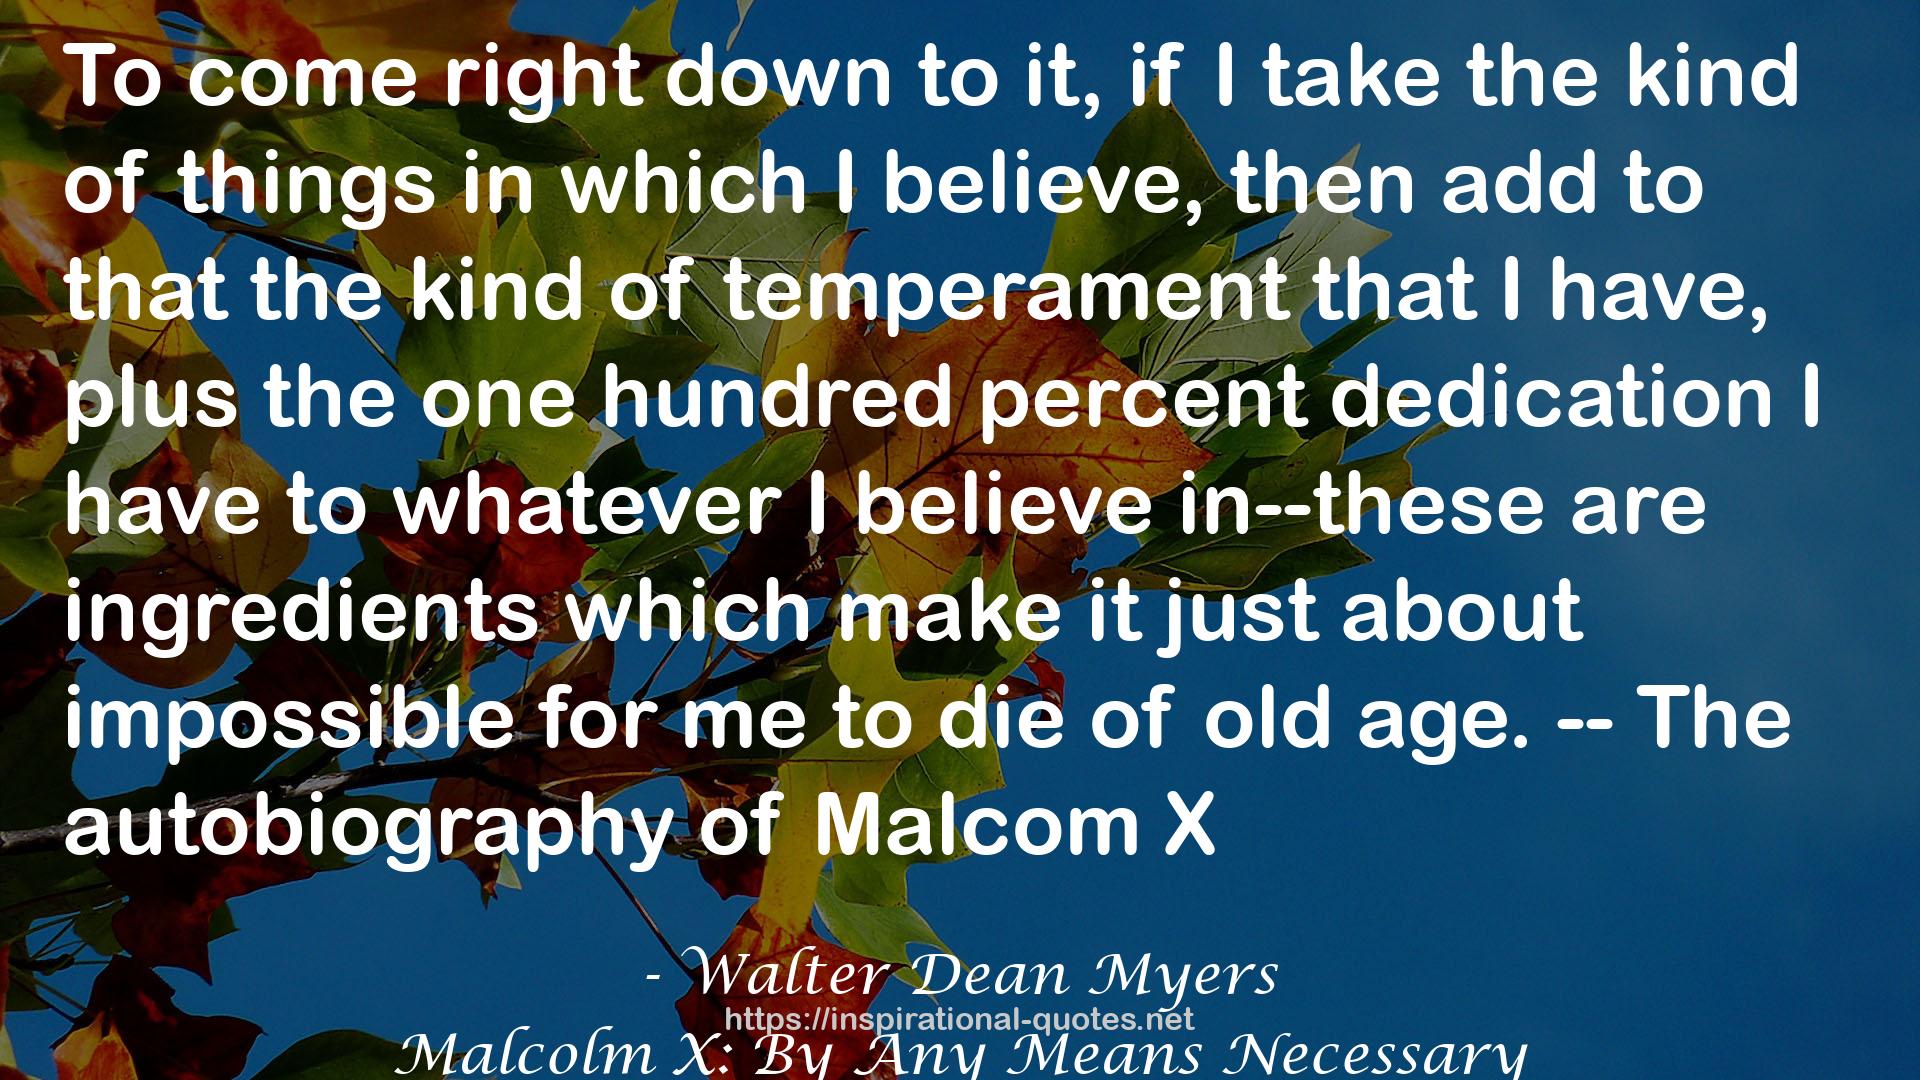 Malcolm X: By Any Means Necessary QUOTES